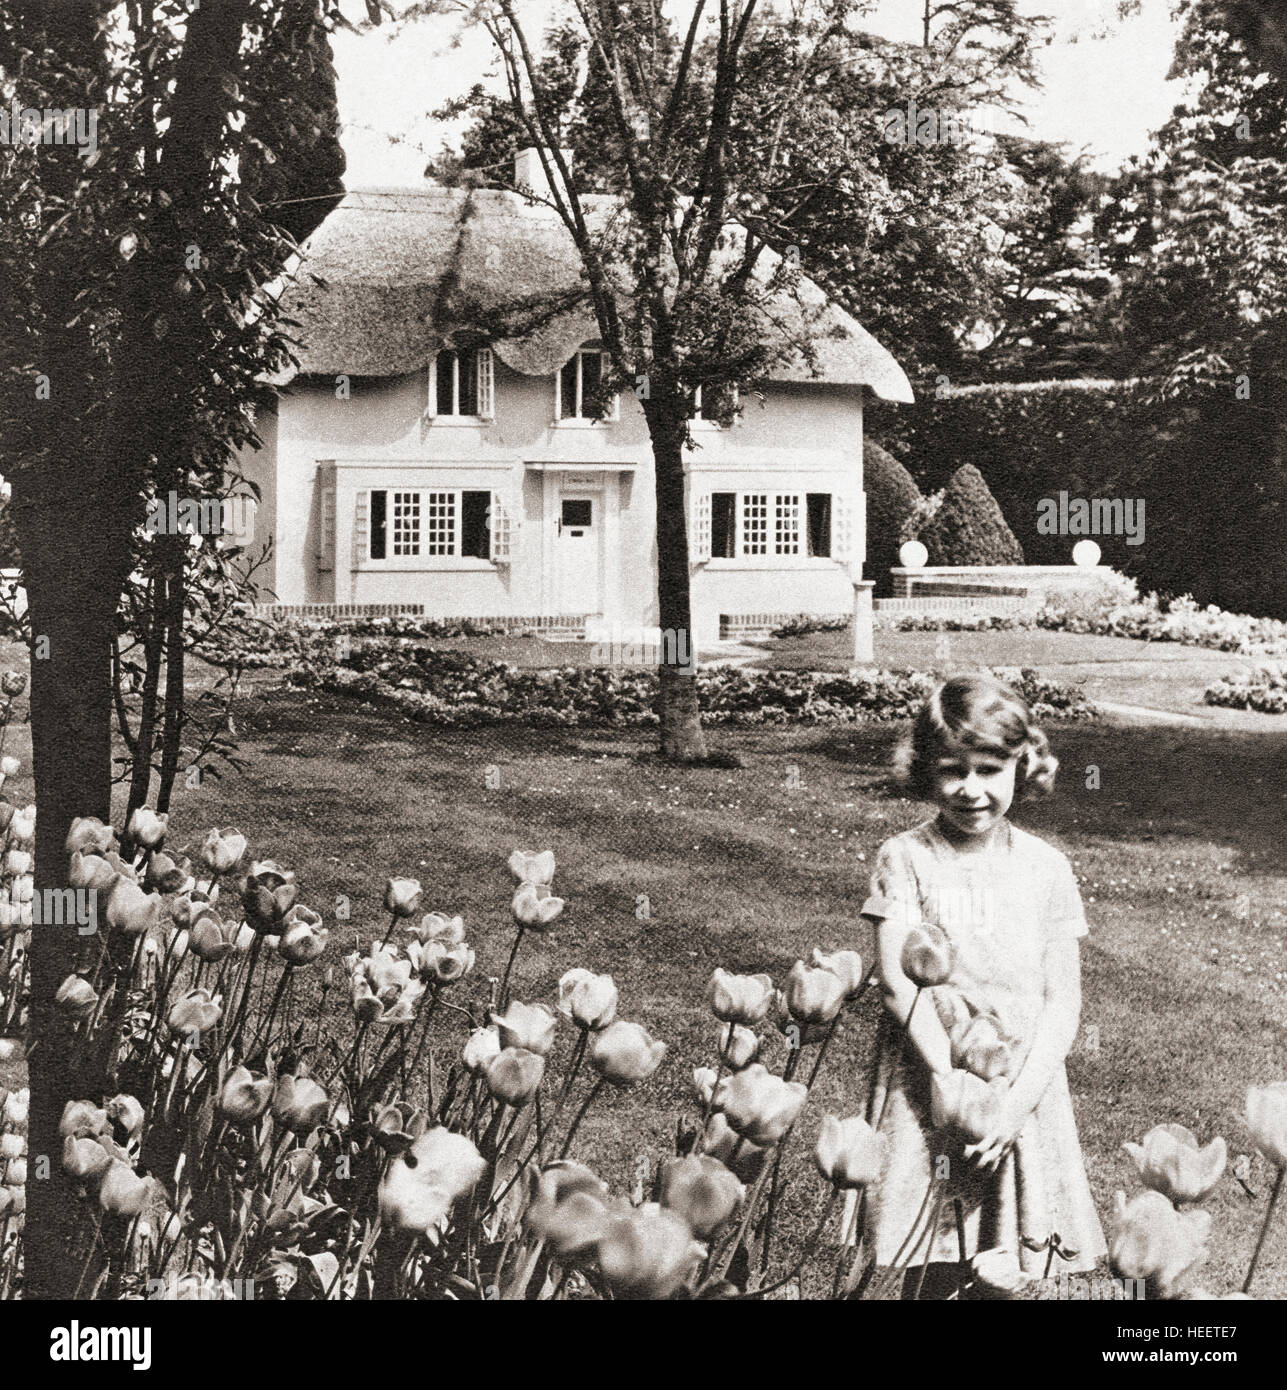 Princess Elizabeth at Y Bwthyn Bach or The Little House, situated in the garden of the Royal Lodge, Windsor Great Park, Berkshire, England. This miniature cottage was a gift to her from the people of Wales.  Princess Elizabeth, future Queen Elizabeth II, seen here aged nine.  Elizabeth II, 1926 - 2022. Queen of the United Kingdom, Canada, Australia and New Zealand. Stock Photo